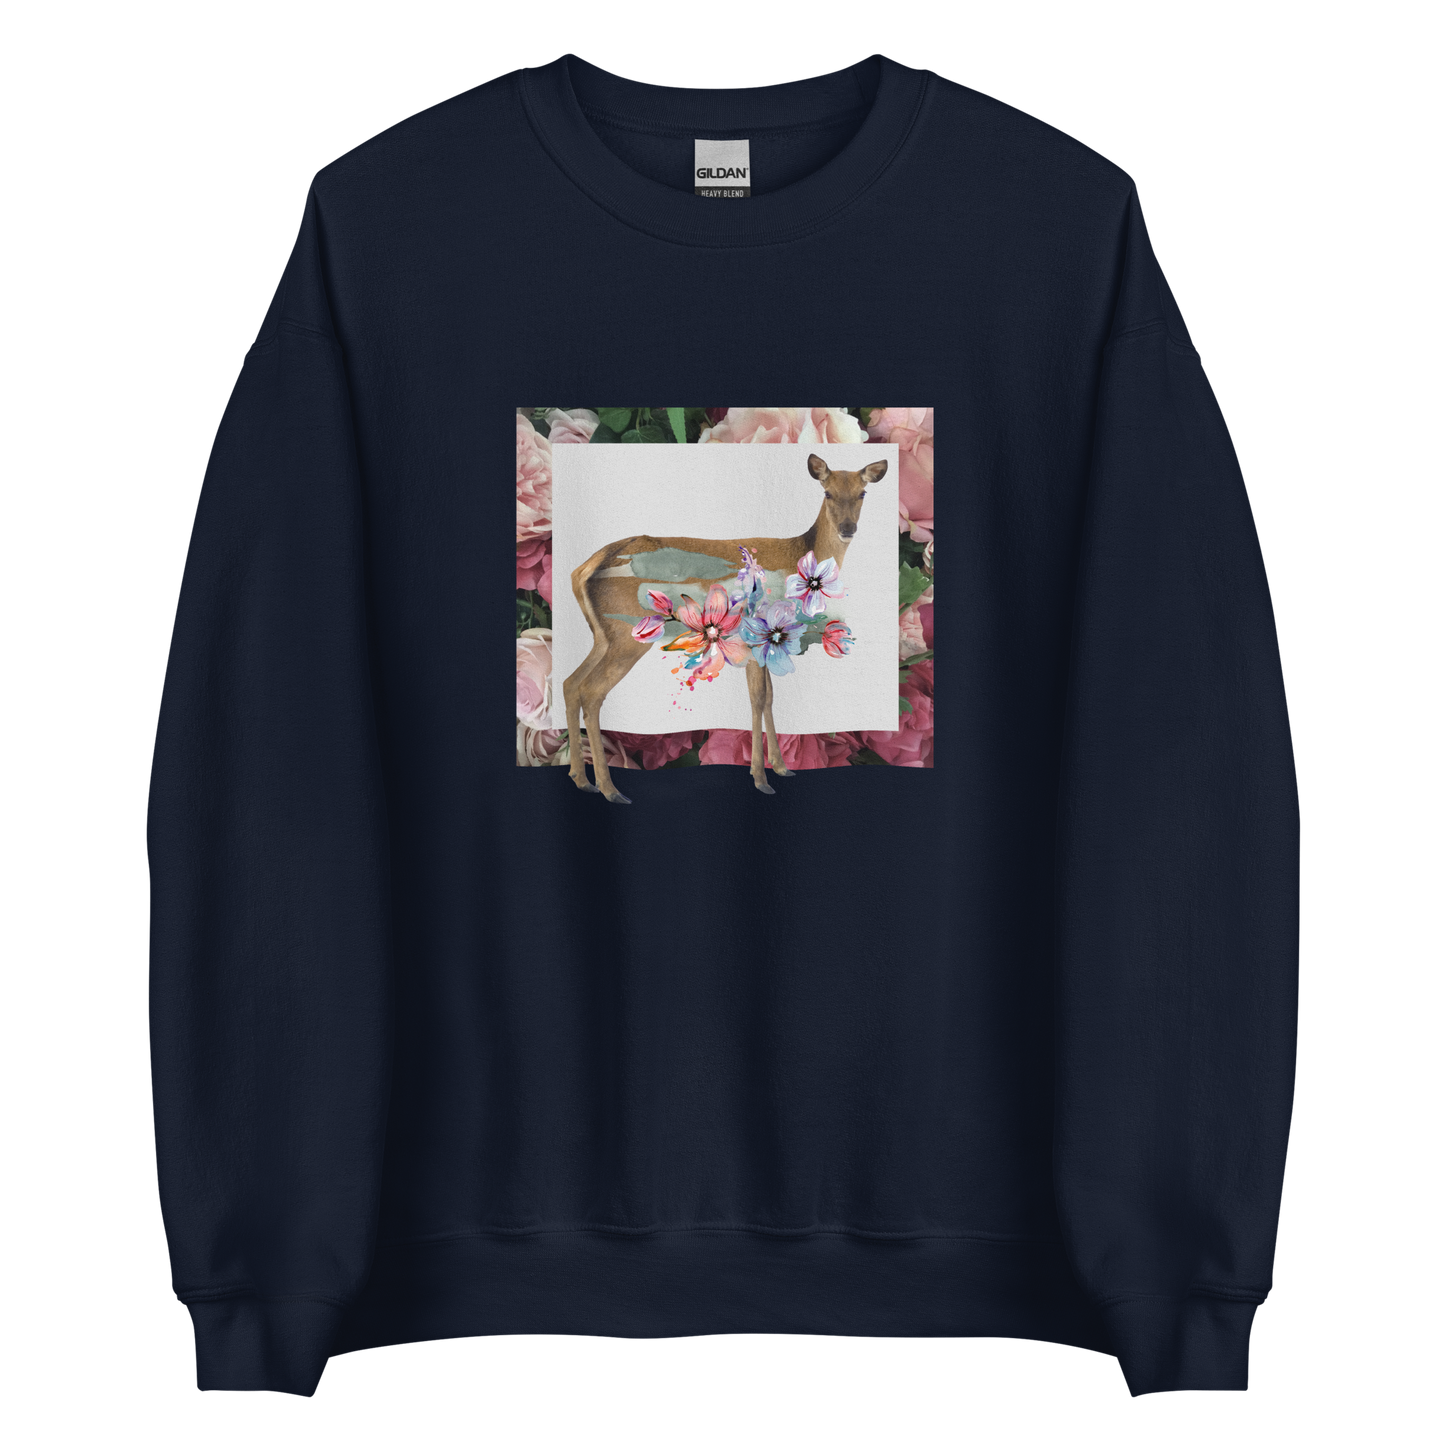 Navy Floral Deer Sweatshirt featuring a beautifully detailed vibrant Floral Deer graphic on the chest - Cute Graphic Deer Sweatshirts - Boozy Fox